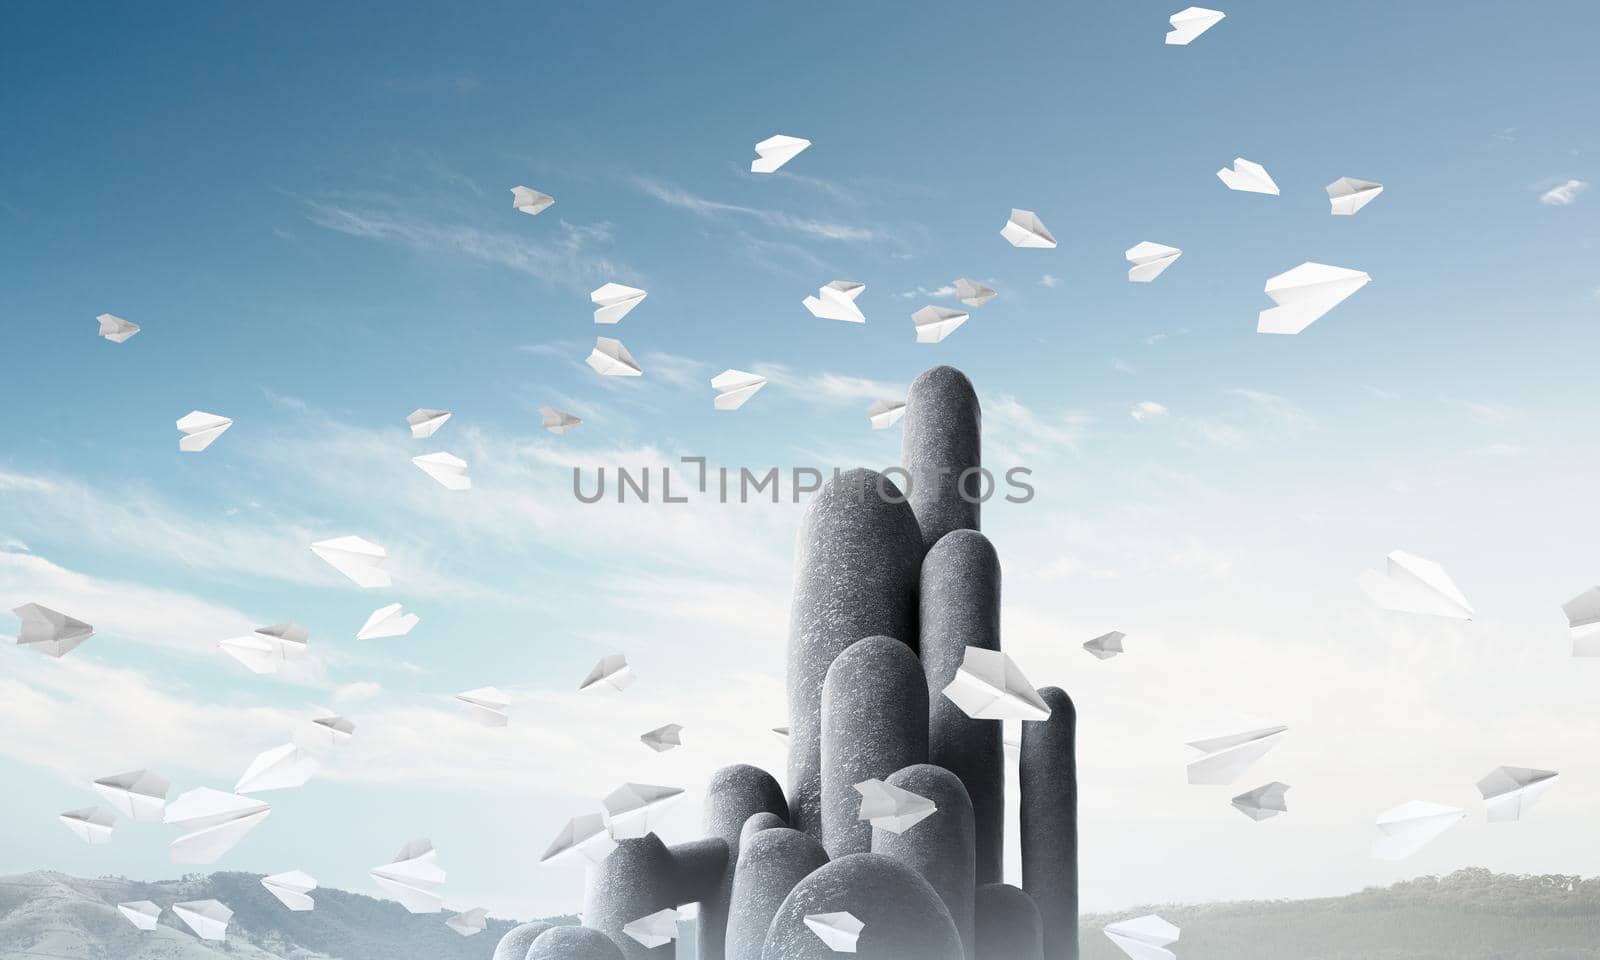 Image of high and huge stone columns located outdoors among flying paper planes with beautiful landscape on background. Wallpaper, backdrop with copyspace.